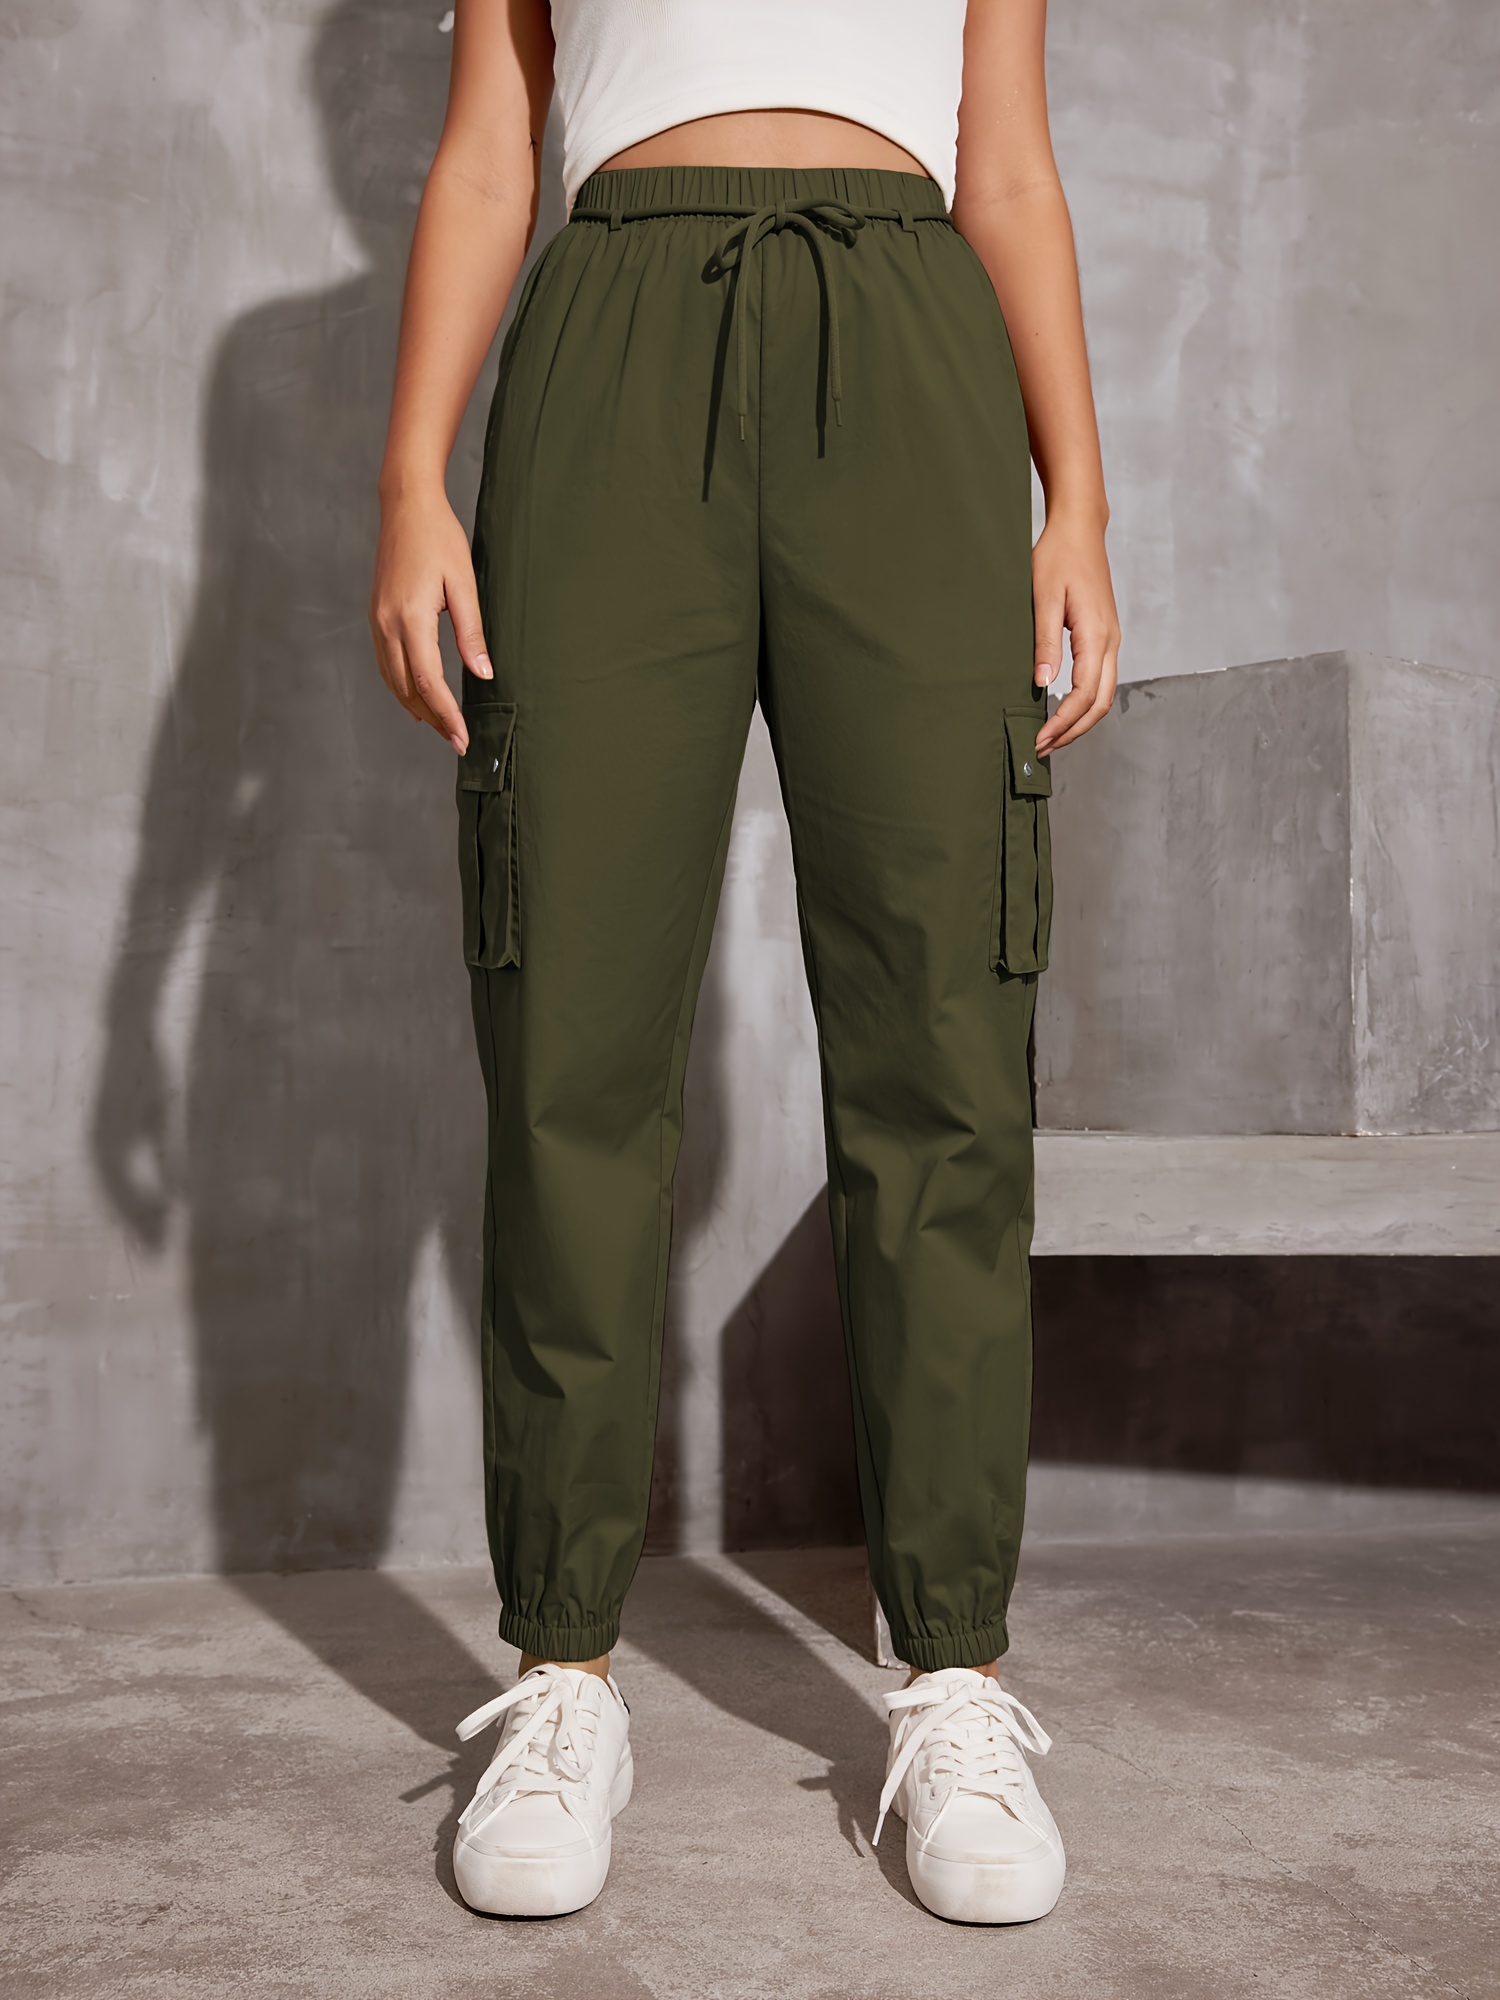 y2k solid pockets drawstring cargo pants casual loose baggy pants for all seasons womens clothing details 1